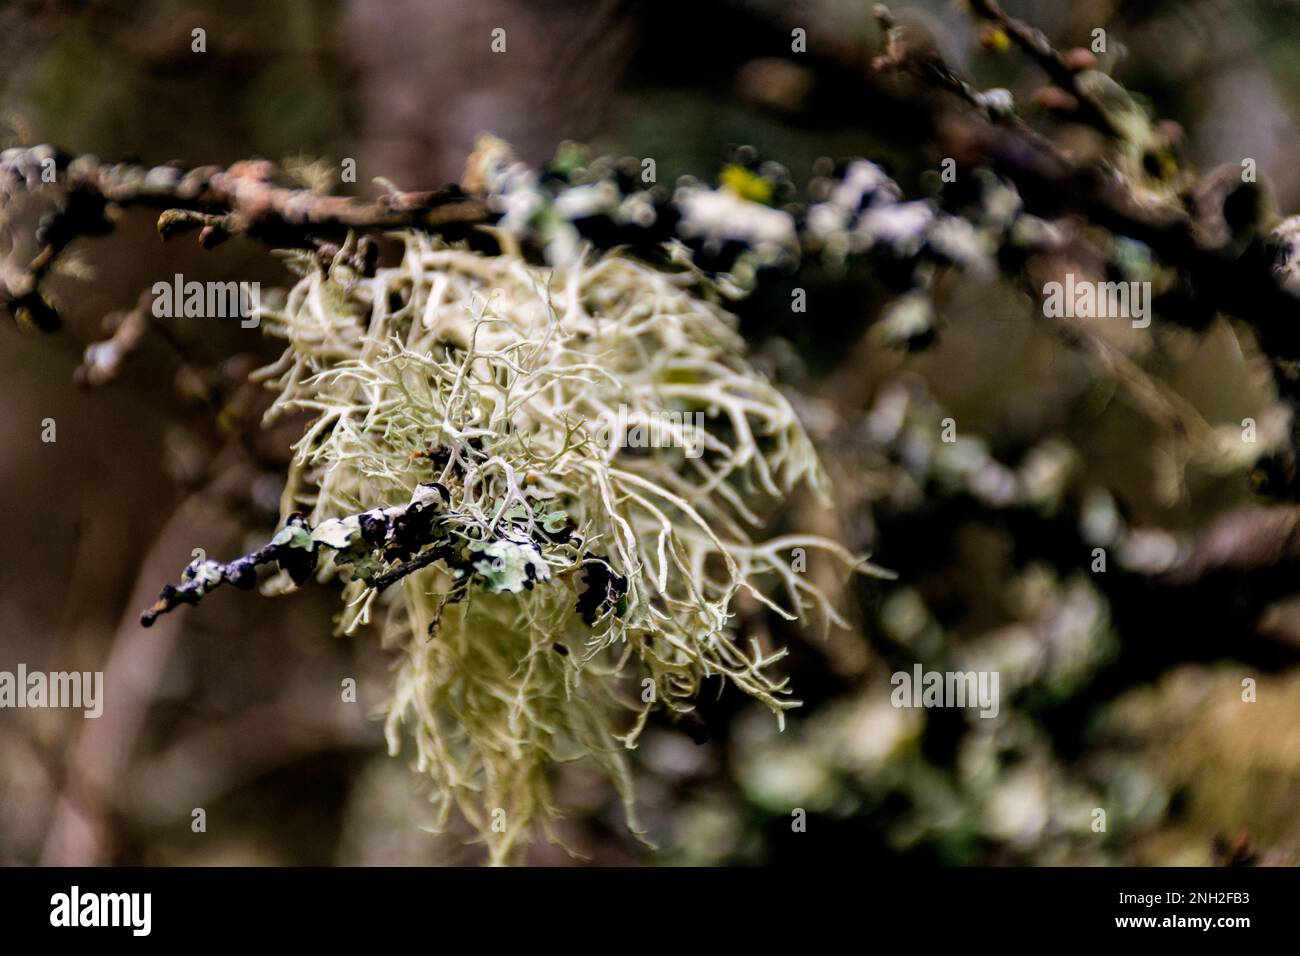 Letharia vulpina, a species of fruticose lichen fungus in the family Parmeliaceae, commonly known as the wolf lichen. Corticolous types of lichens liv Stock Photo